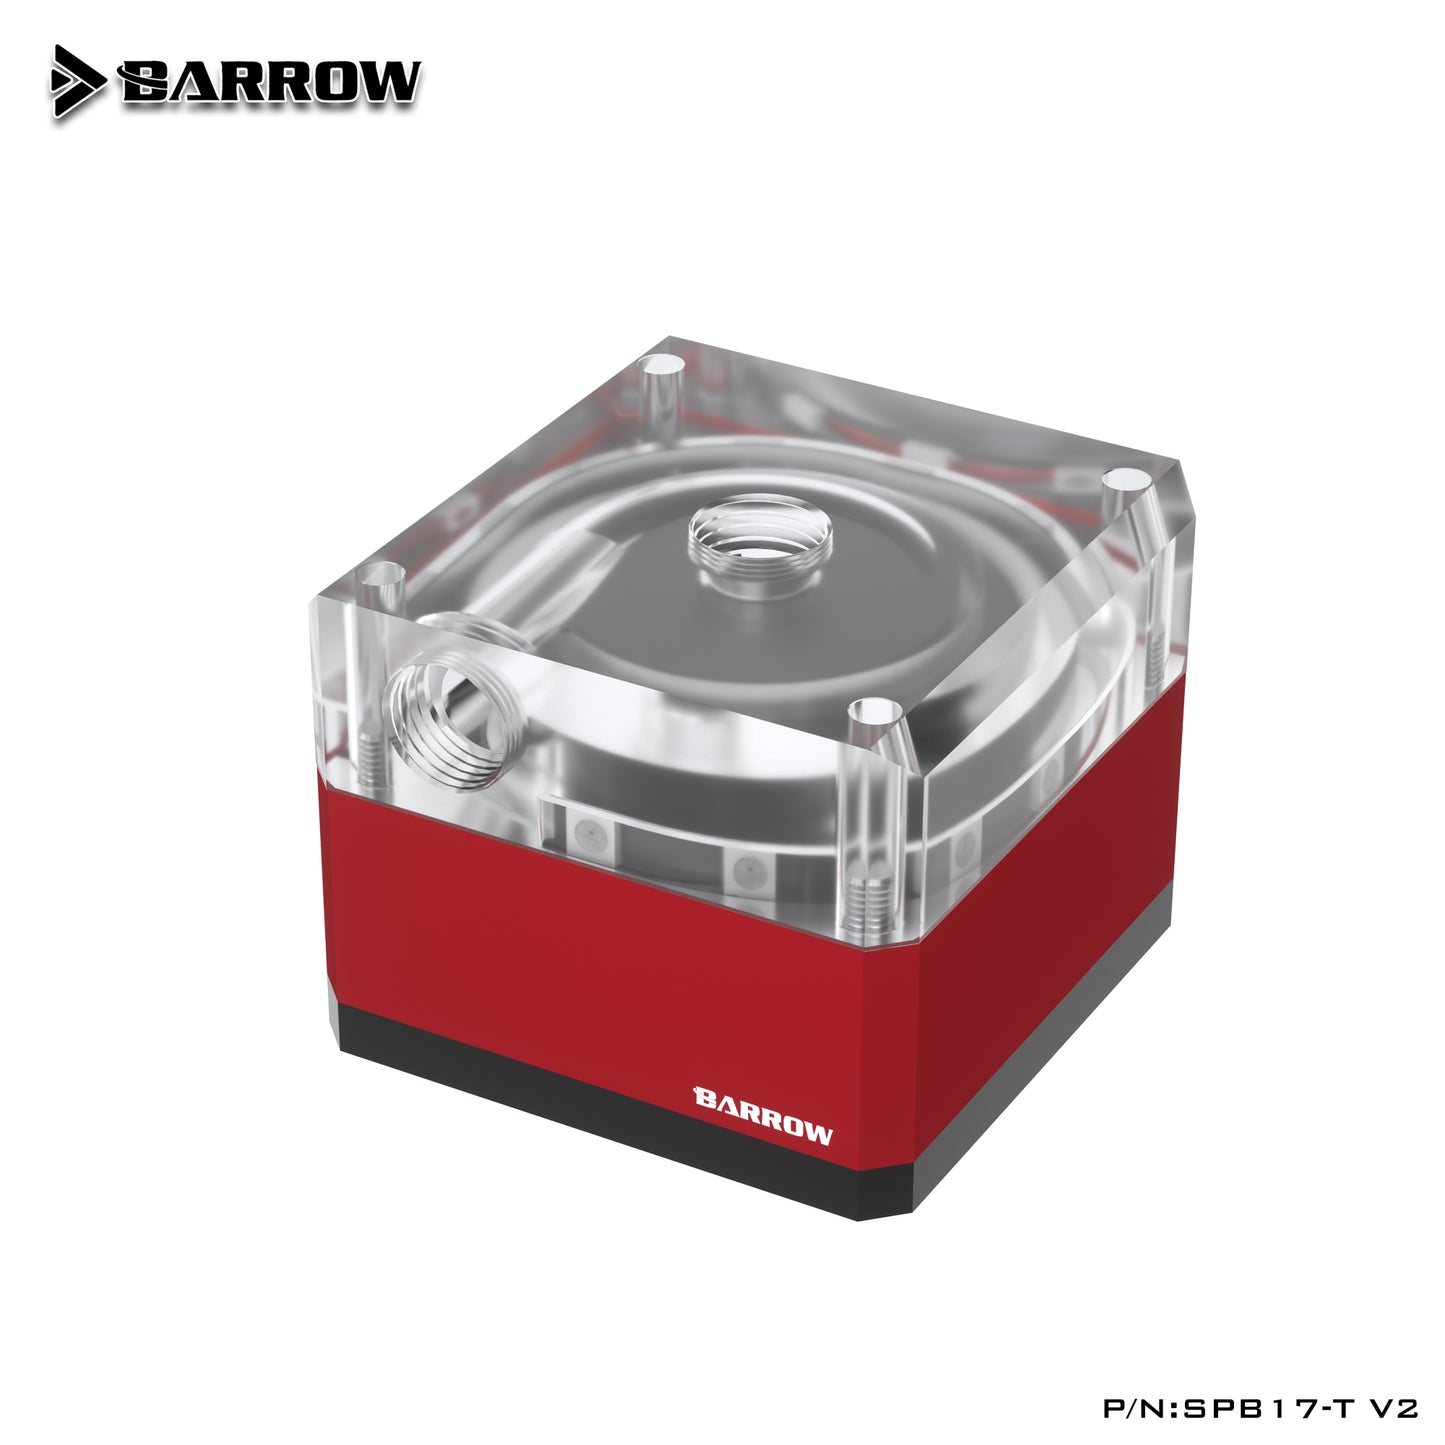 Barrow Basic Edition 17W PWM Pump, Multiple Color Cover, Special For Barrow Distro Plate SPB17-T V2